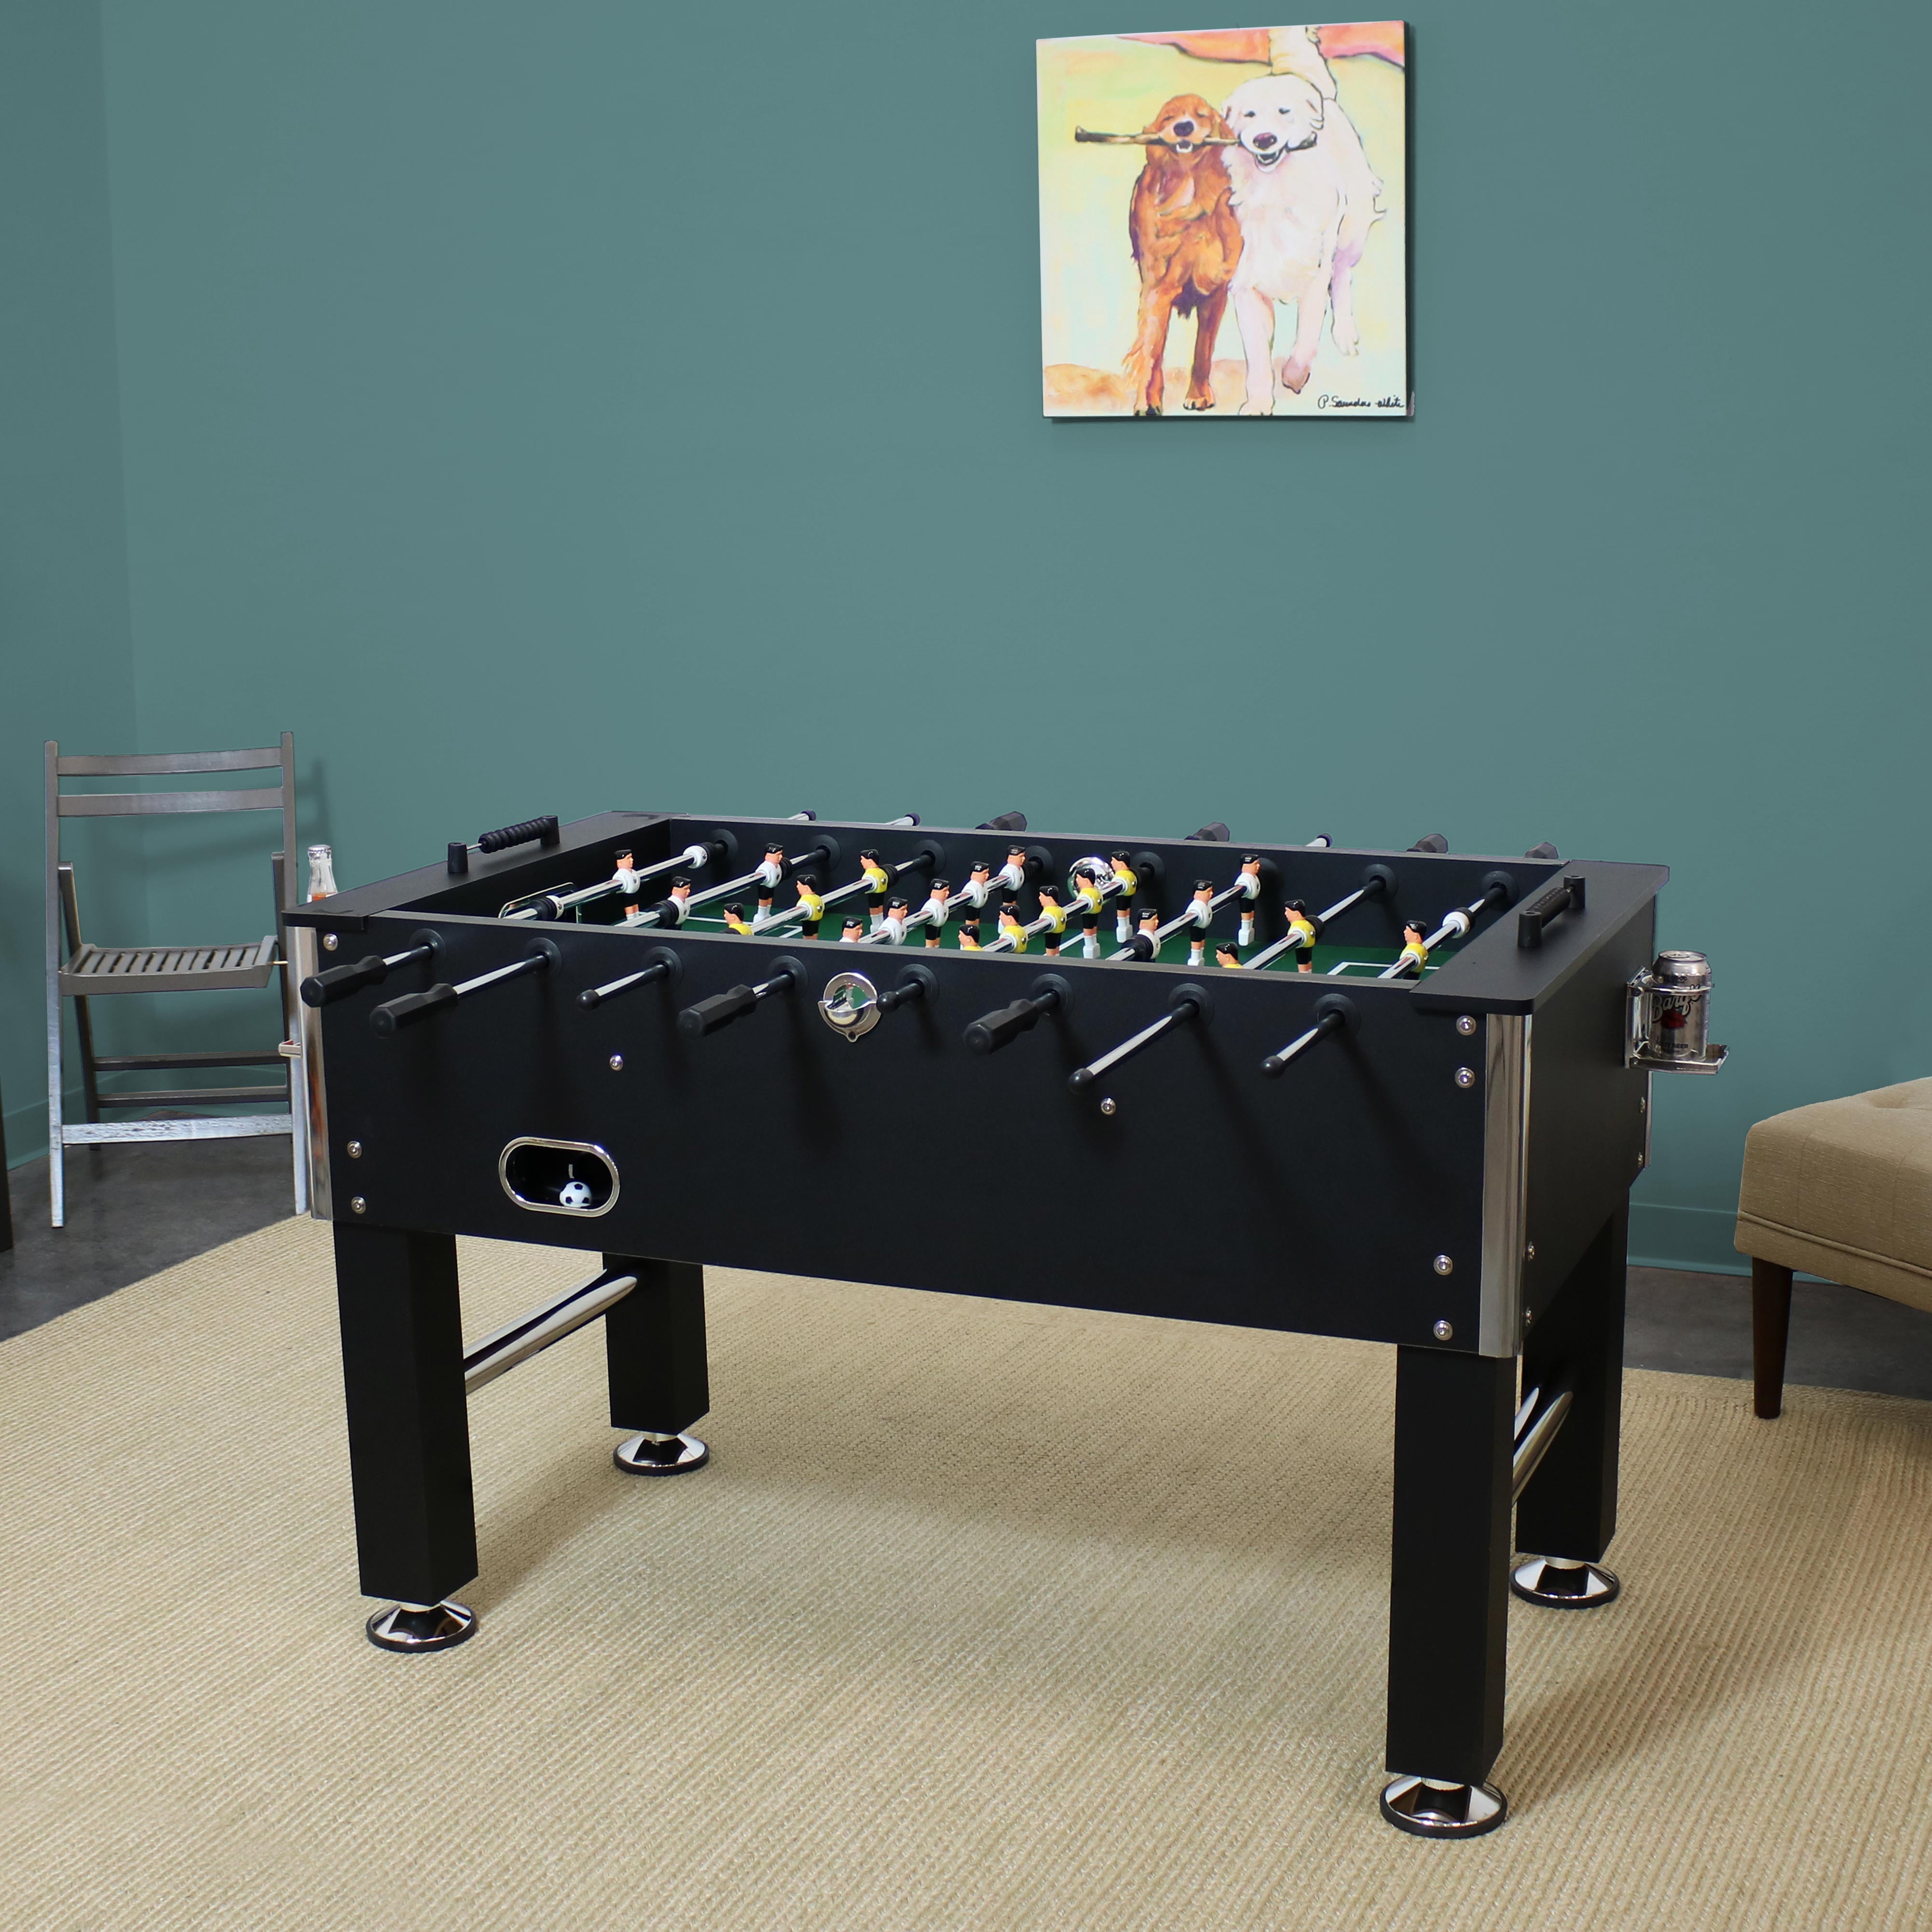 Sunnydaze 55 Inch Durable Foosball Table with Drink ...